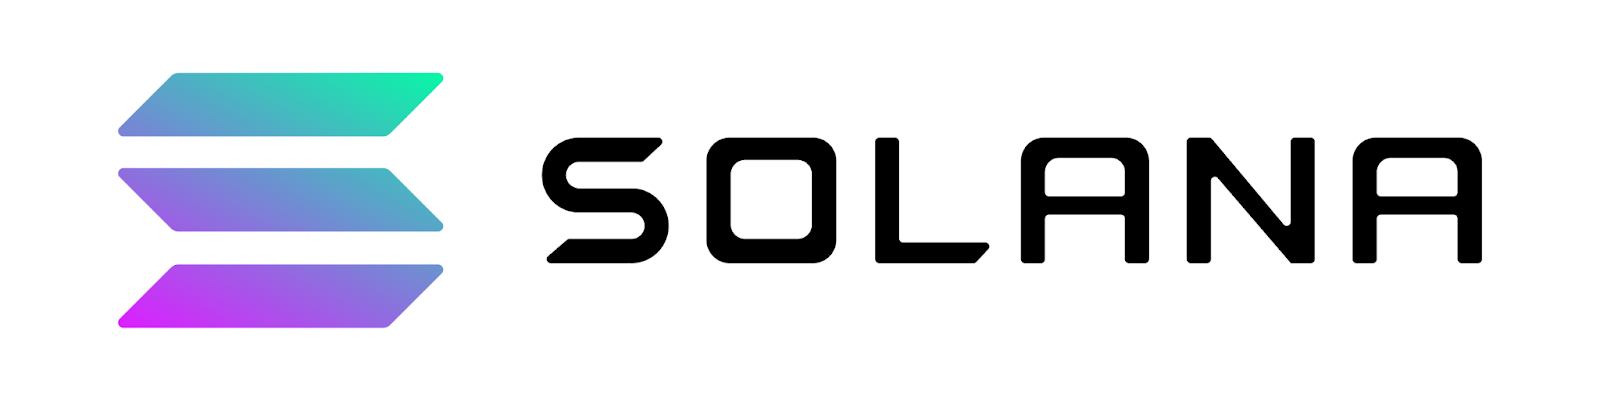 The title "Solana" with the Solana logo on white background.